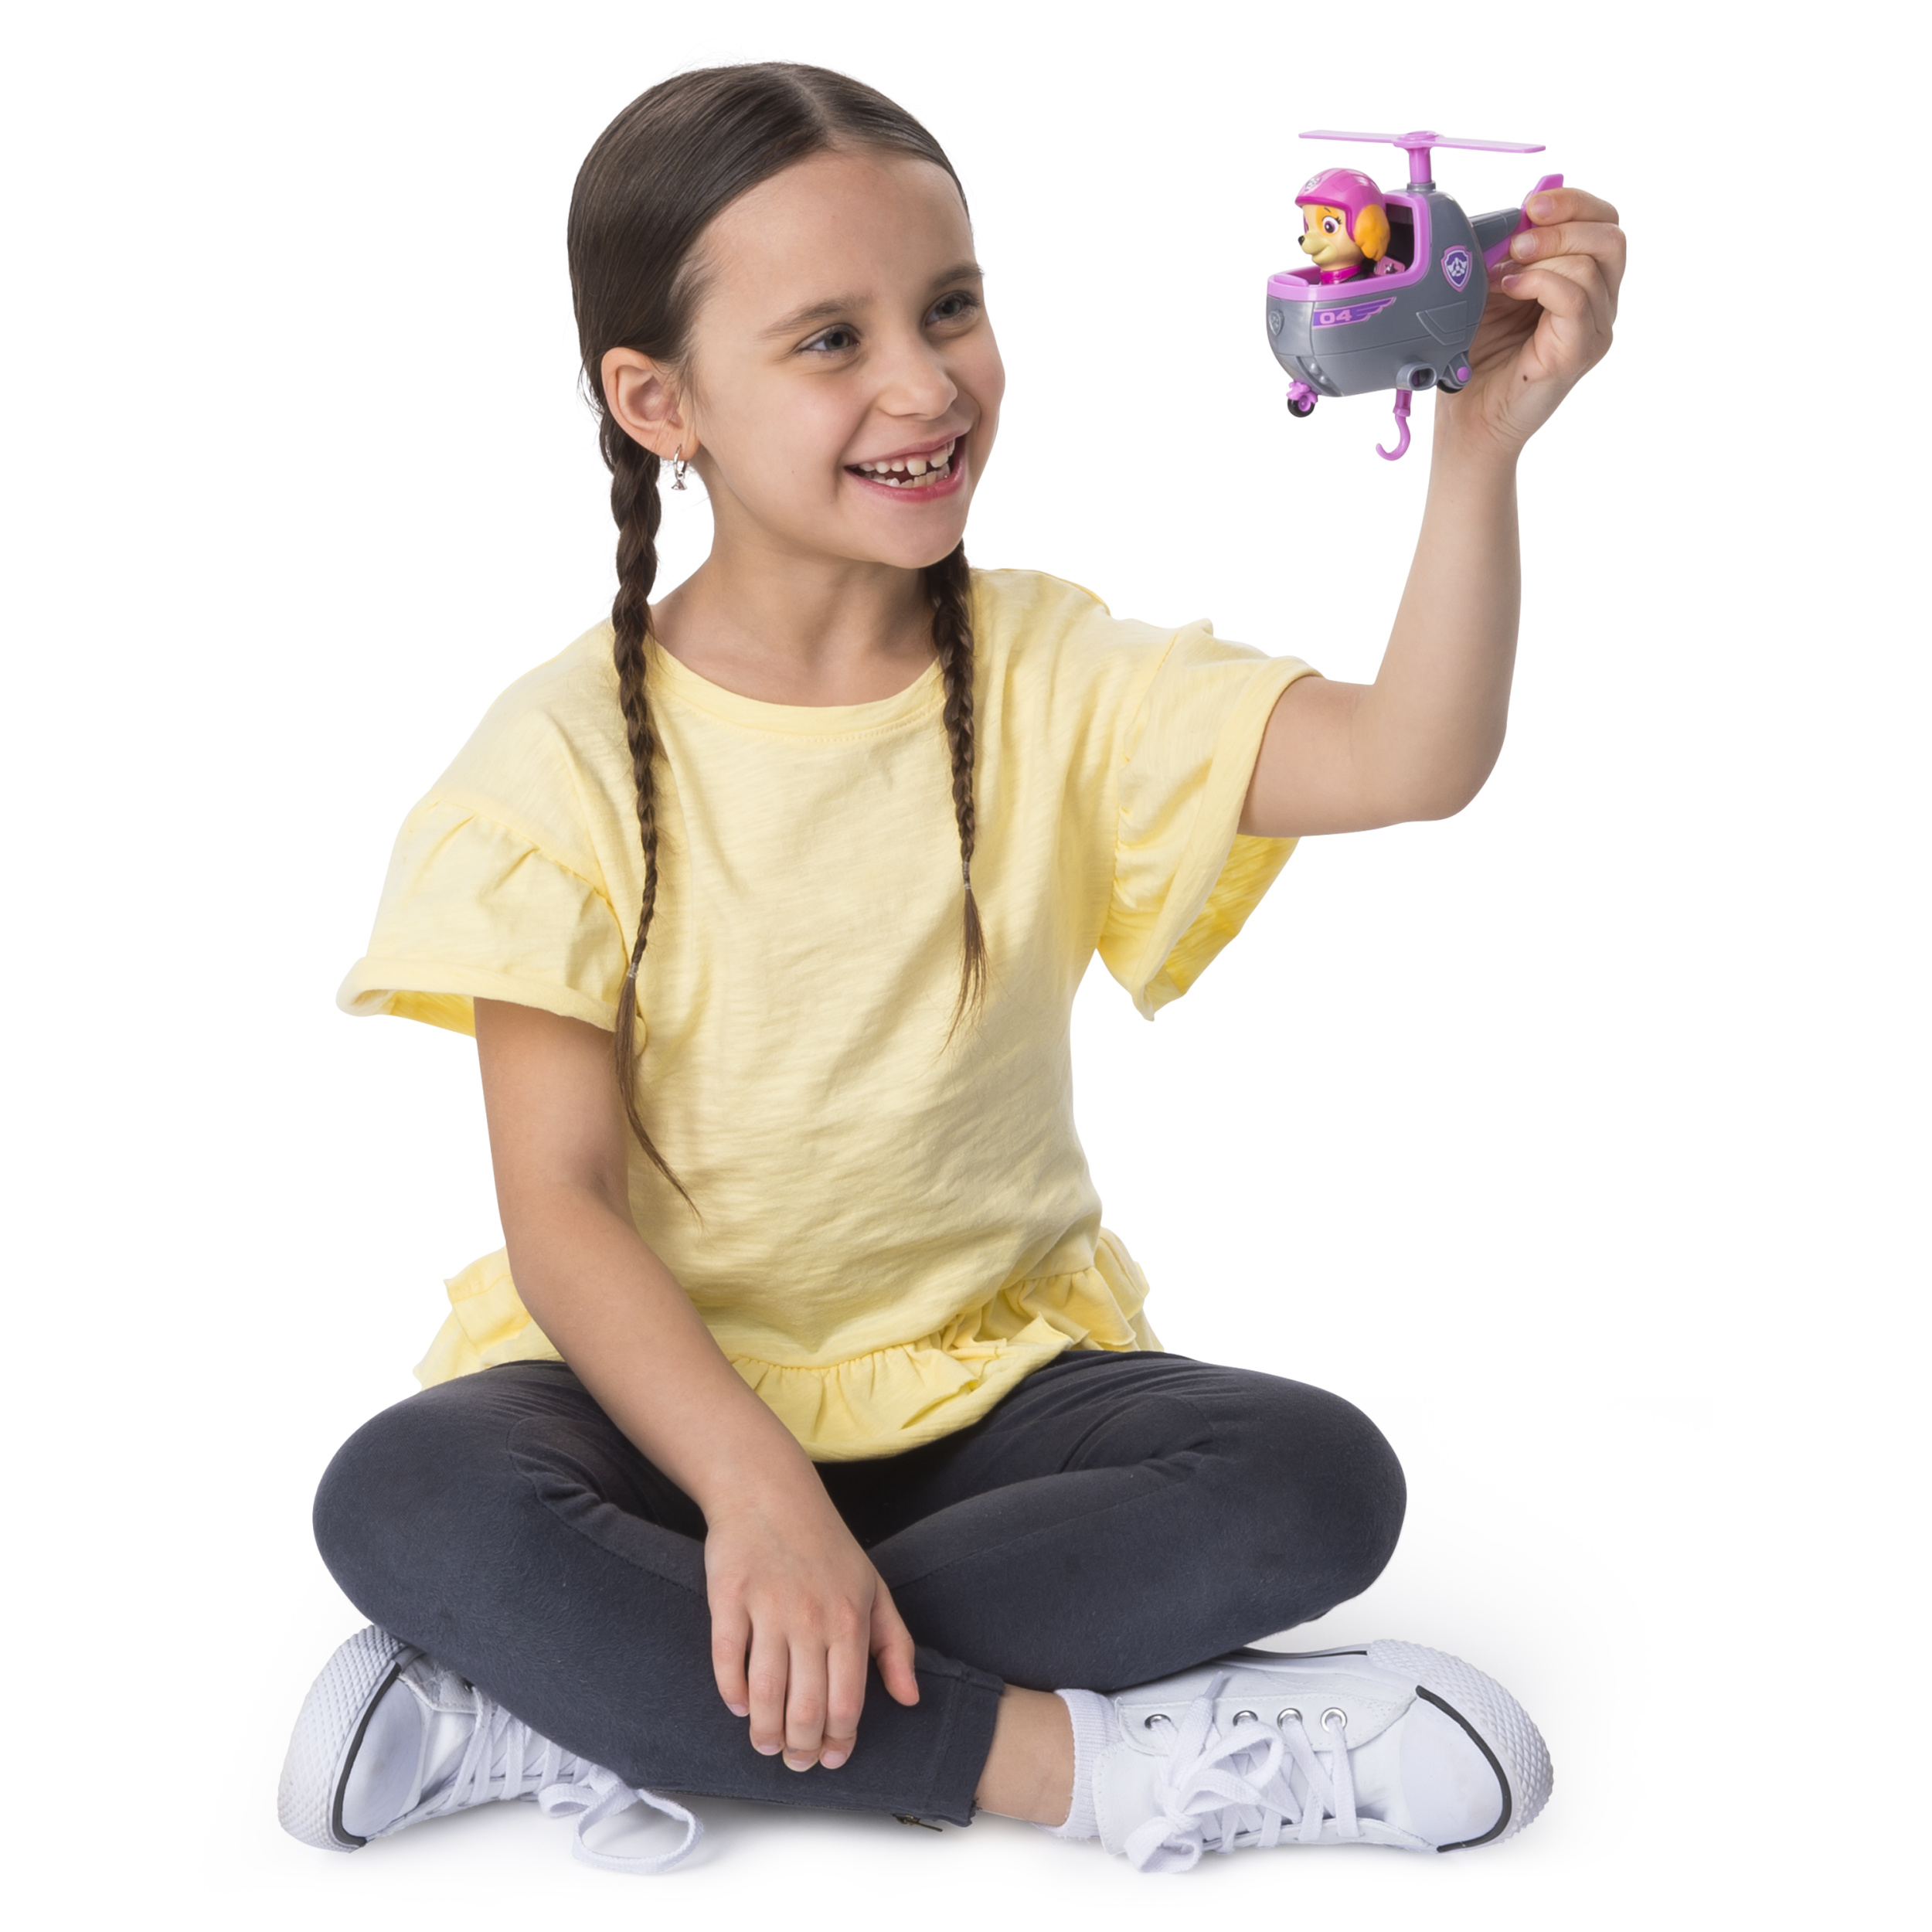 PAW Patrol Ultimate Rescue, Skye’s Mini Helicopter with Collectible Figure, for Ages 3 and Up - image 4 of 6